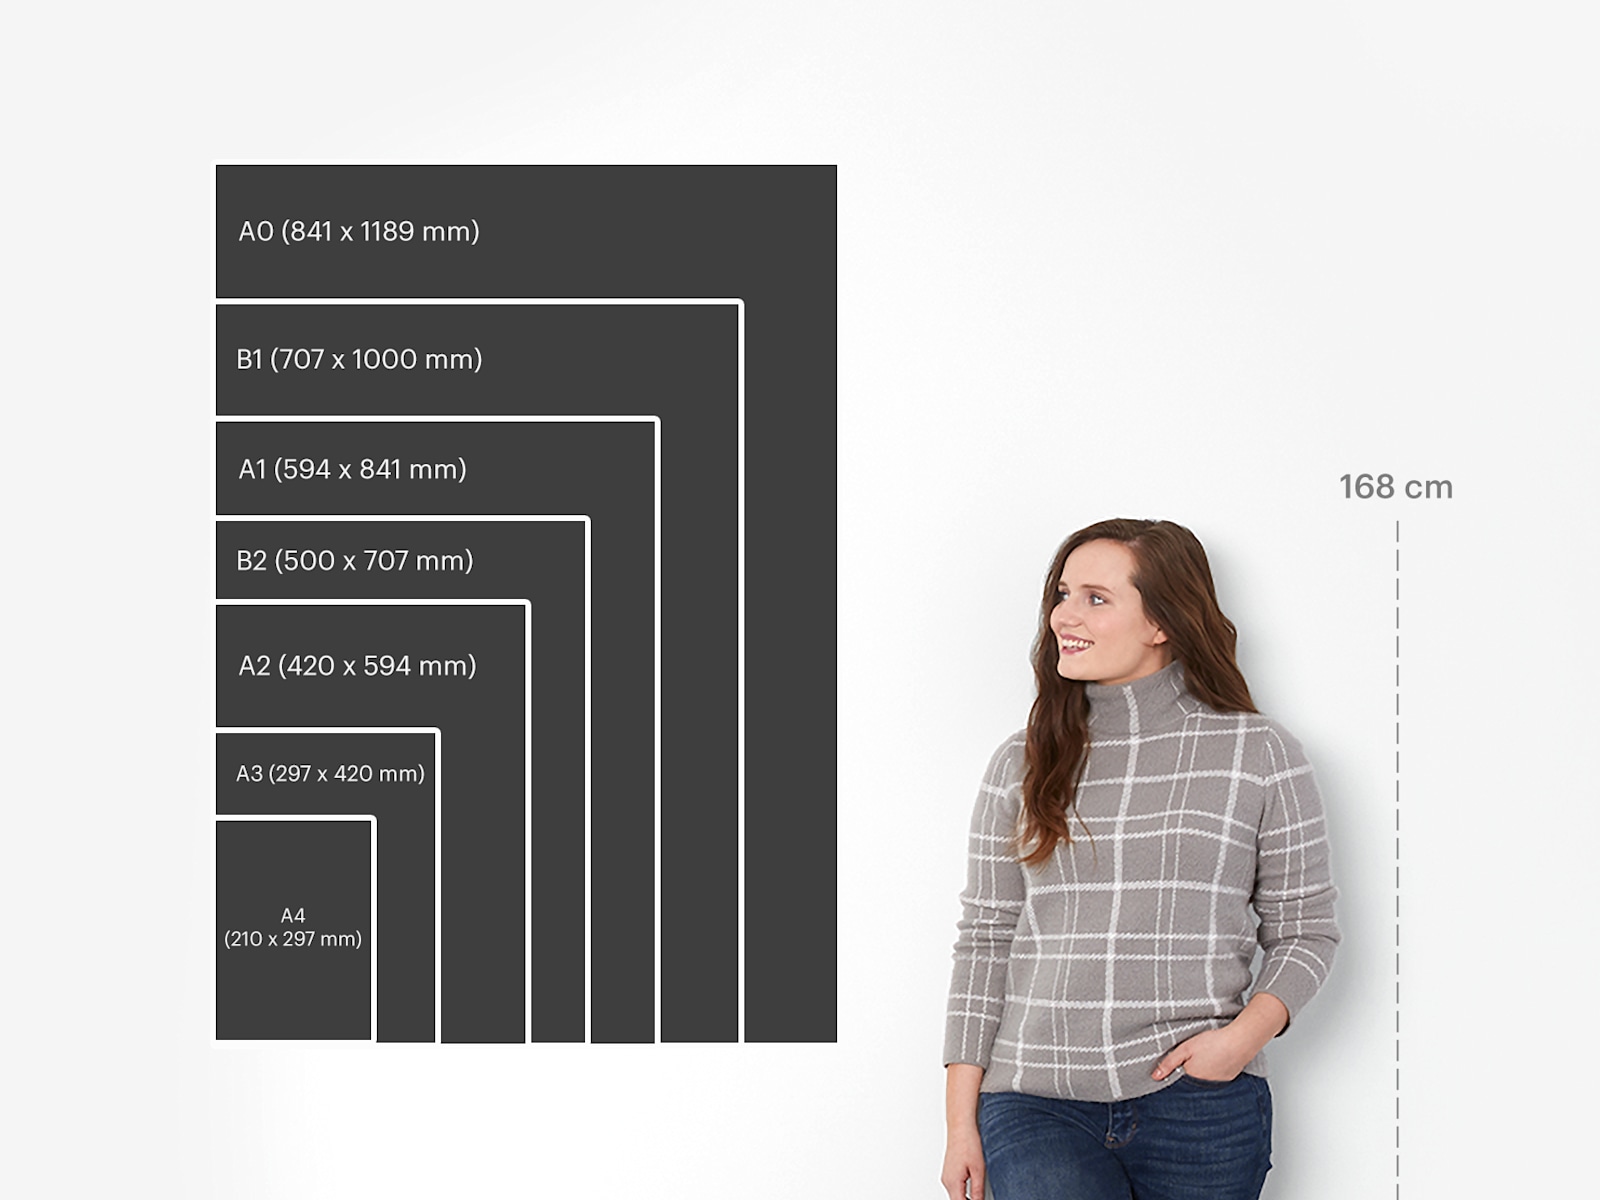 A chart showing 7 different poster sizes and what they look like in relation to a 168 cm tall female model.